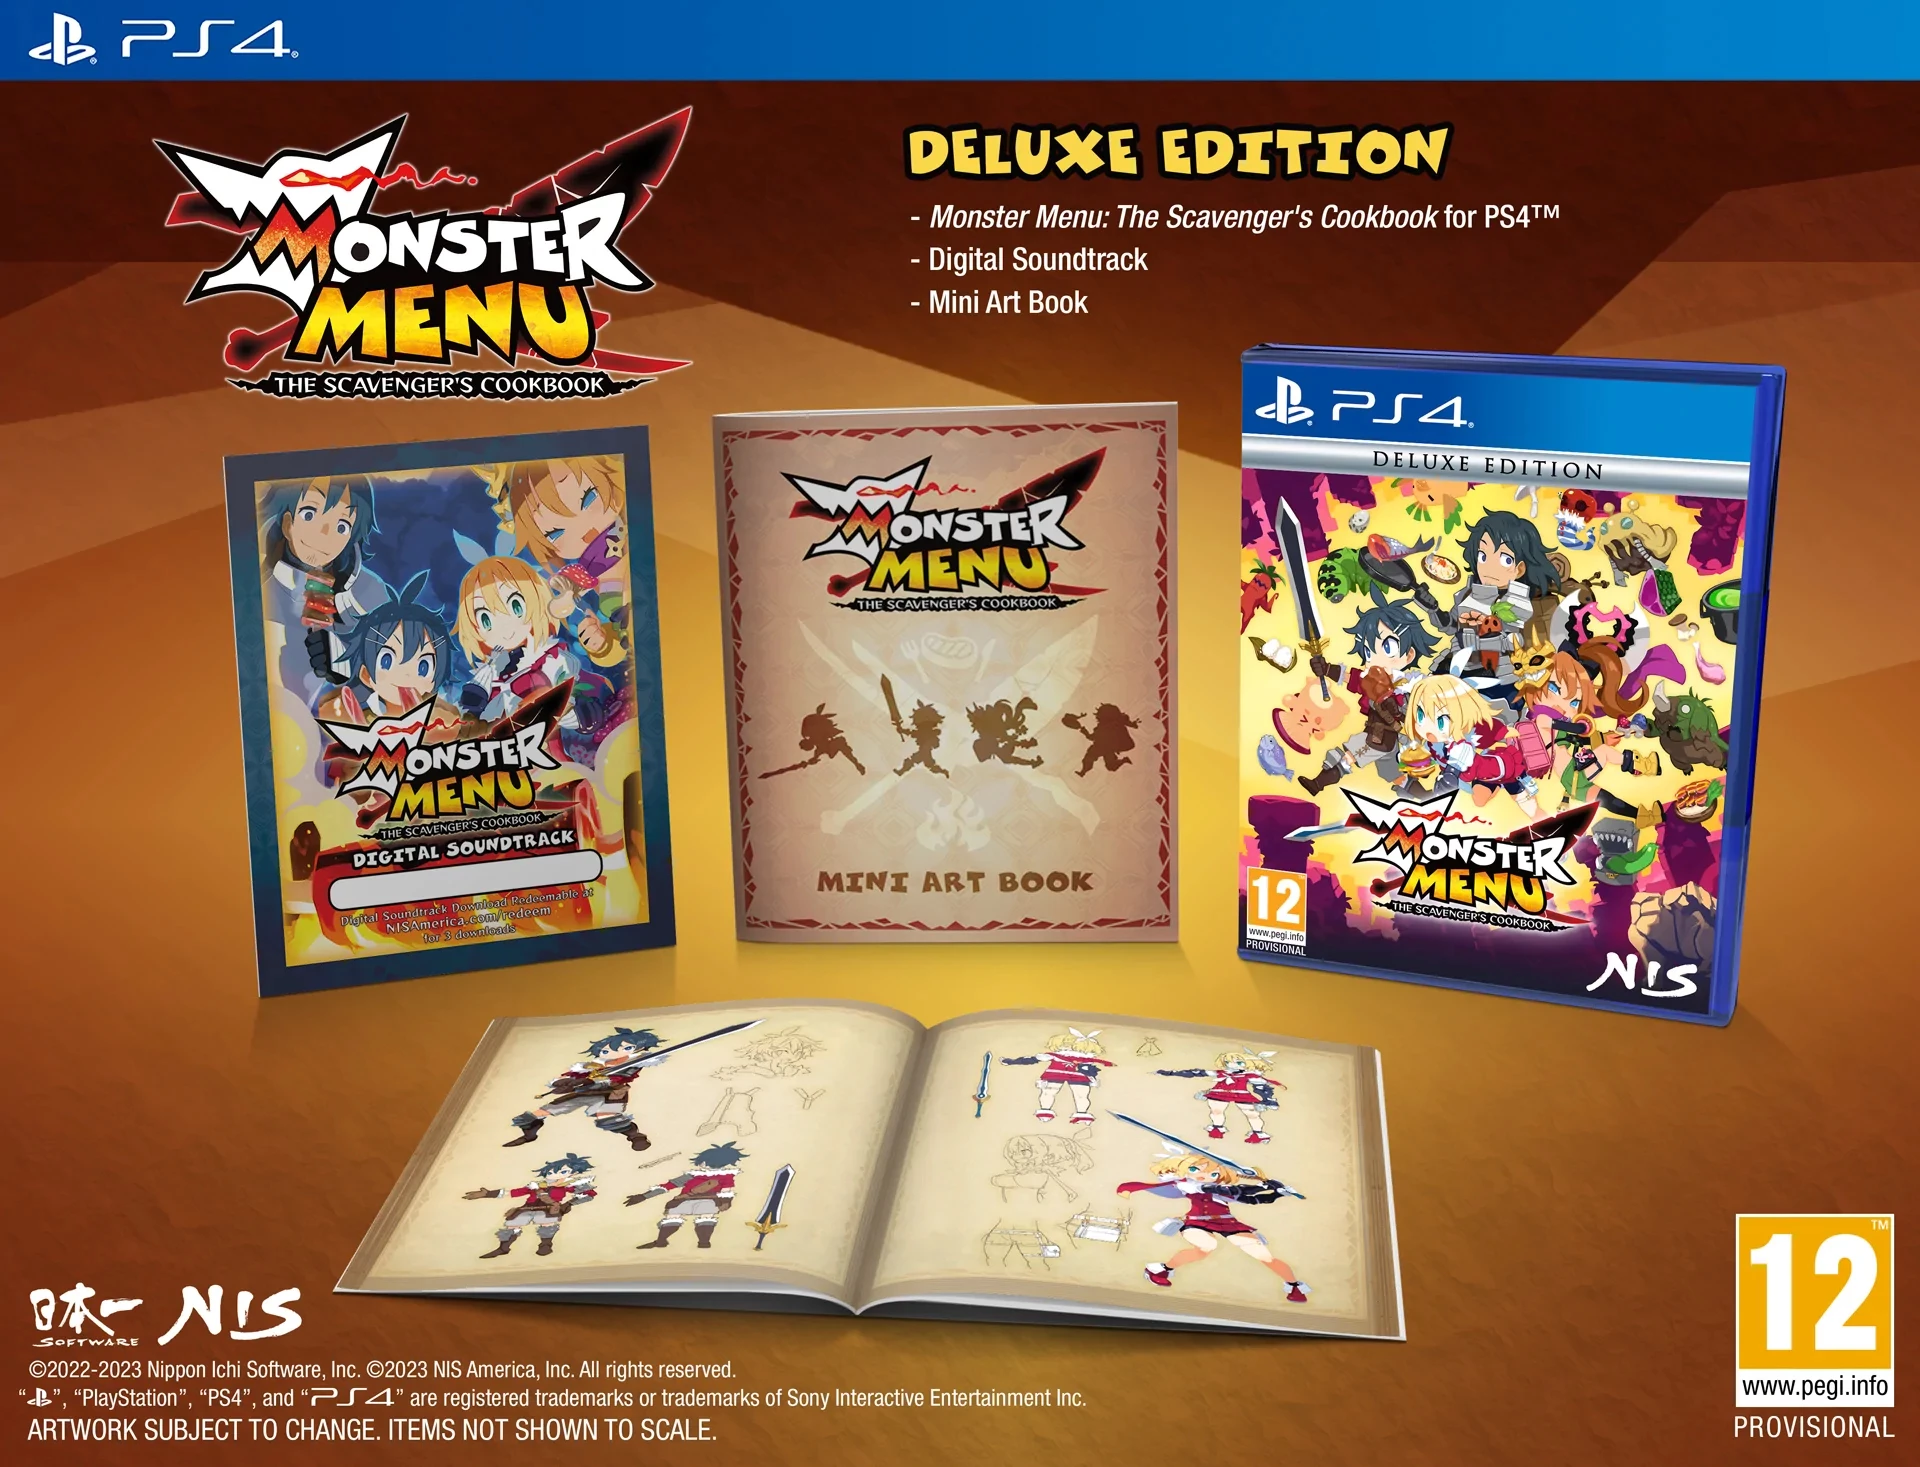 Monster Menu: The Scavenger’s Cookbook - Deluxe Edition (PS4), NIS America